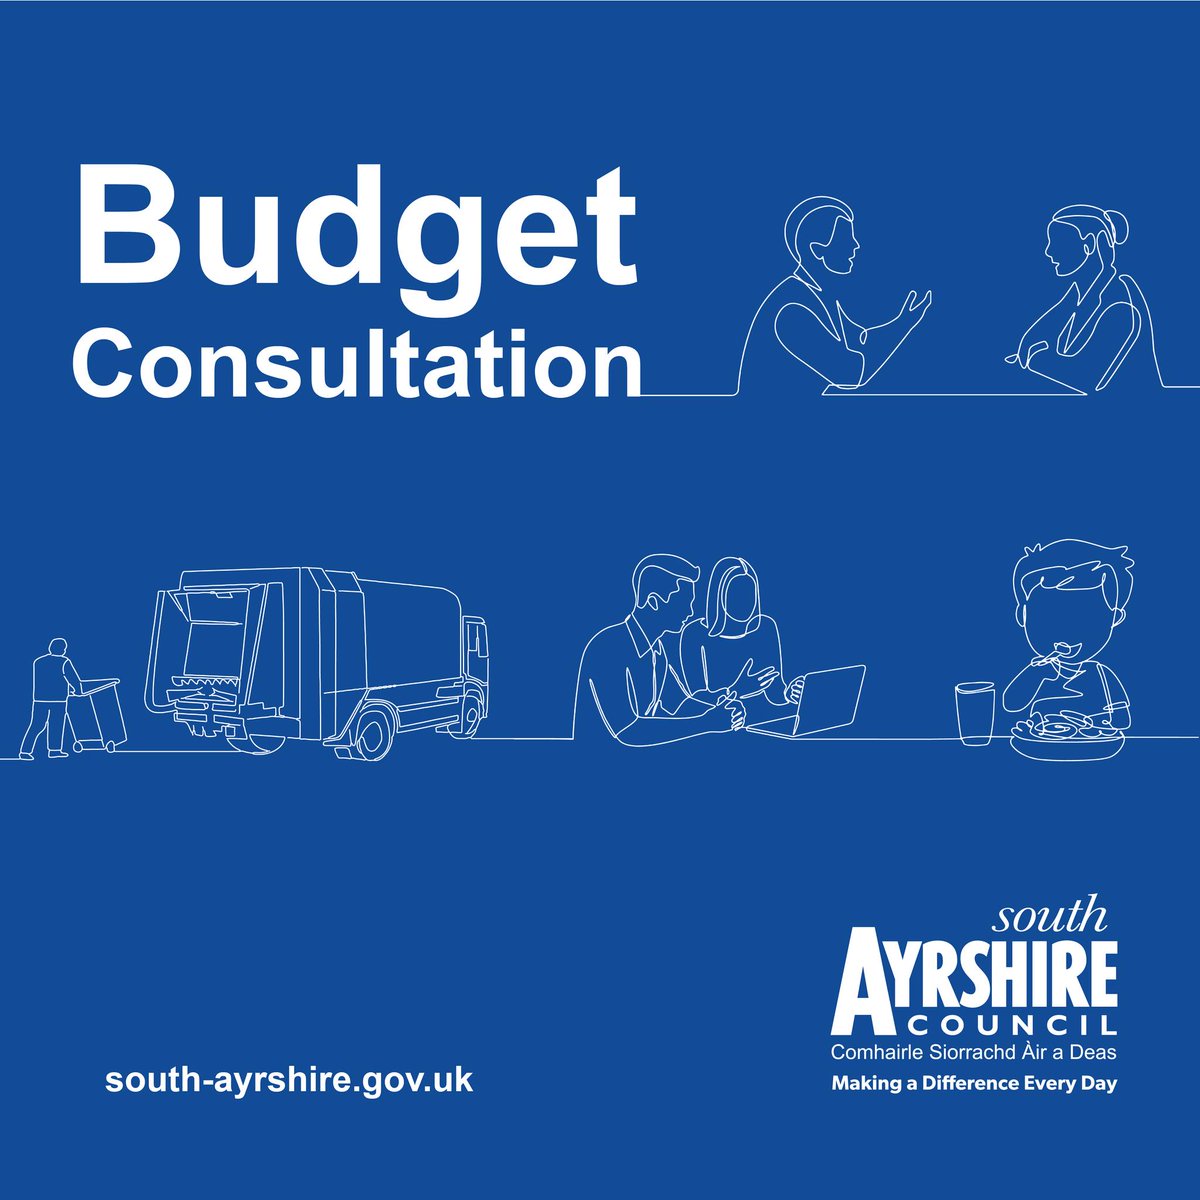 Have your say in our budget consultation! Your feedback from our consultation last year helped to inform some of the decisions that were made, and now we’re looking for your input on future plans. The consultation is open until Sunday 30 June: south-ayrshire.gov.uk/budget-consult…